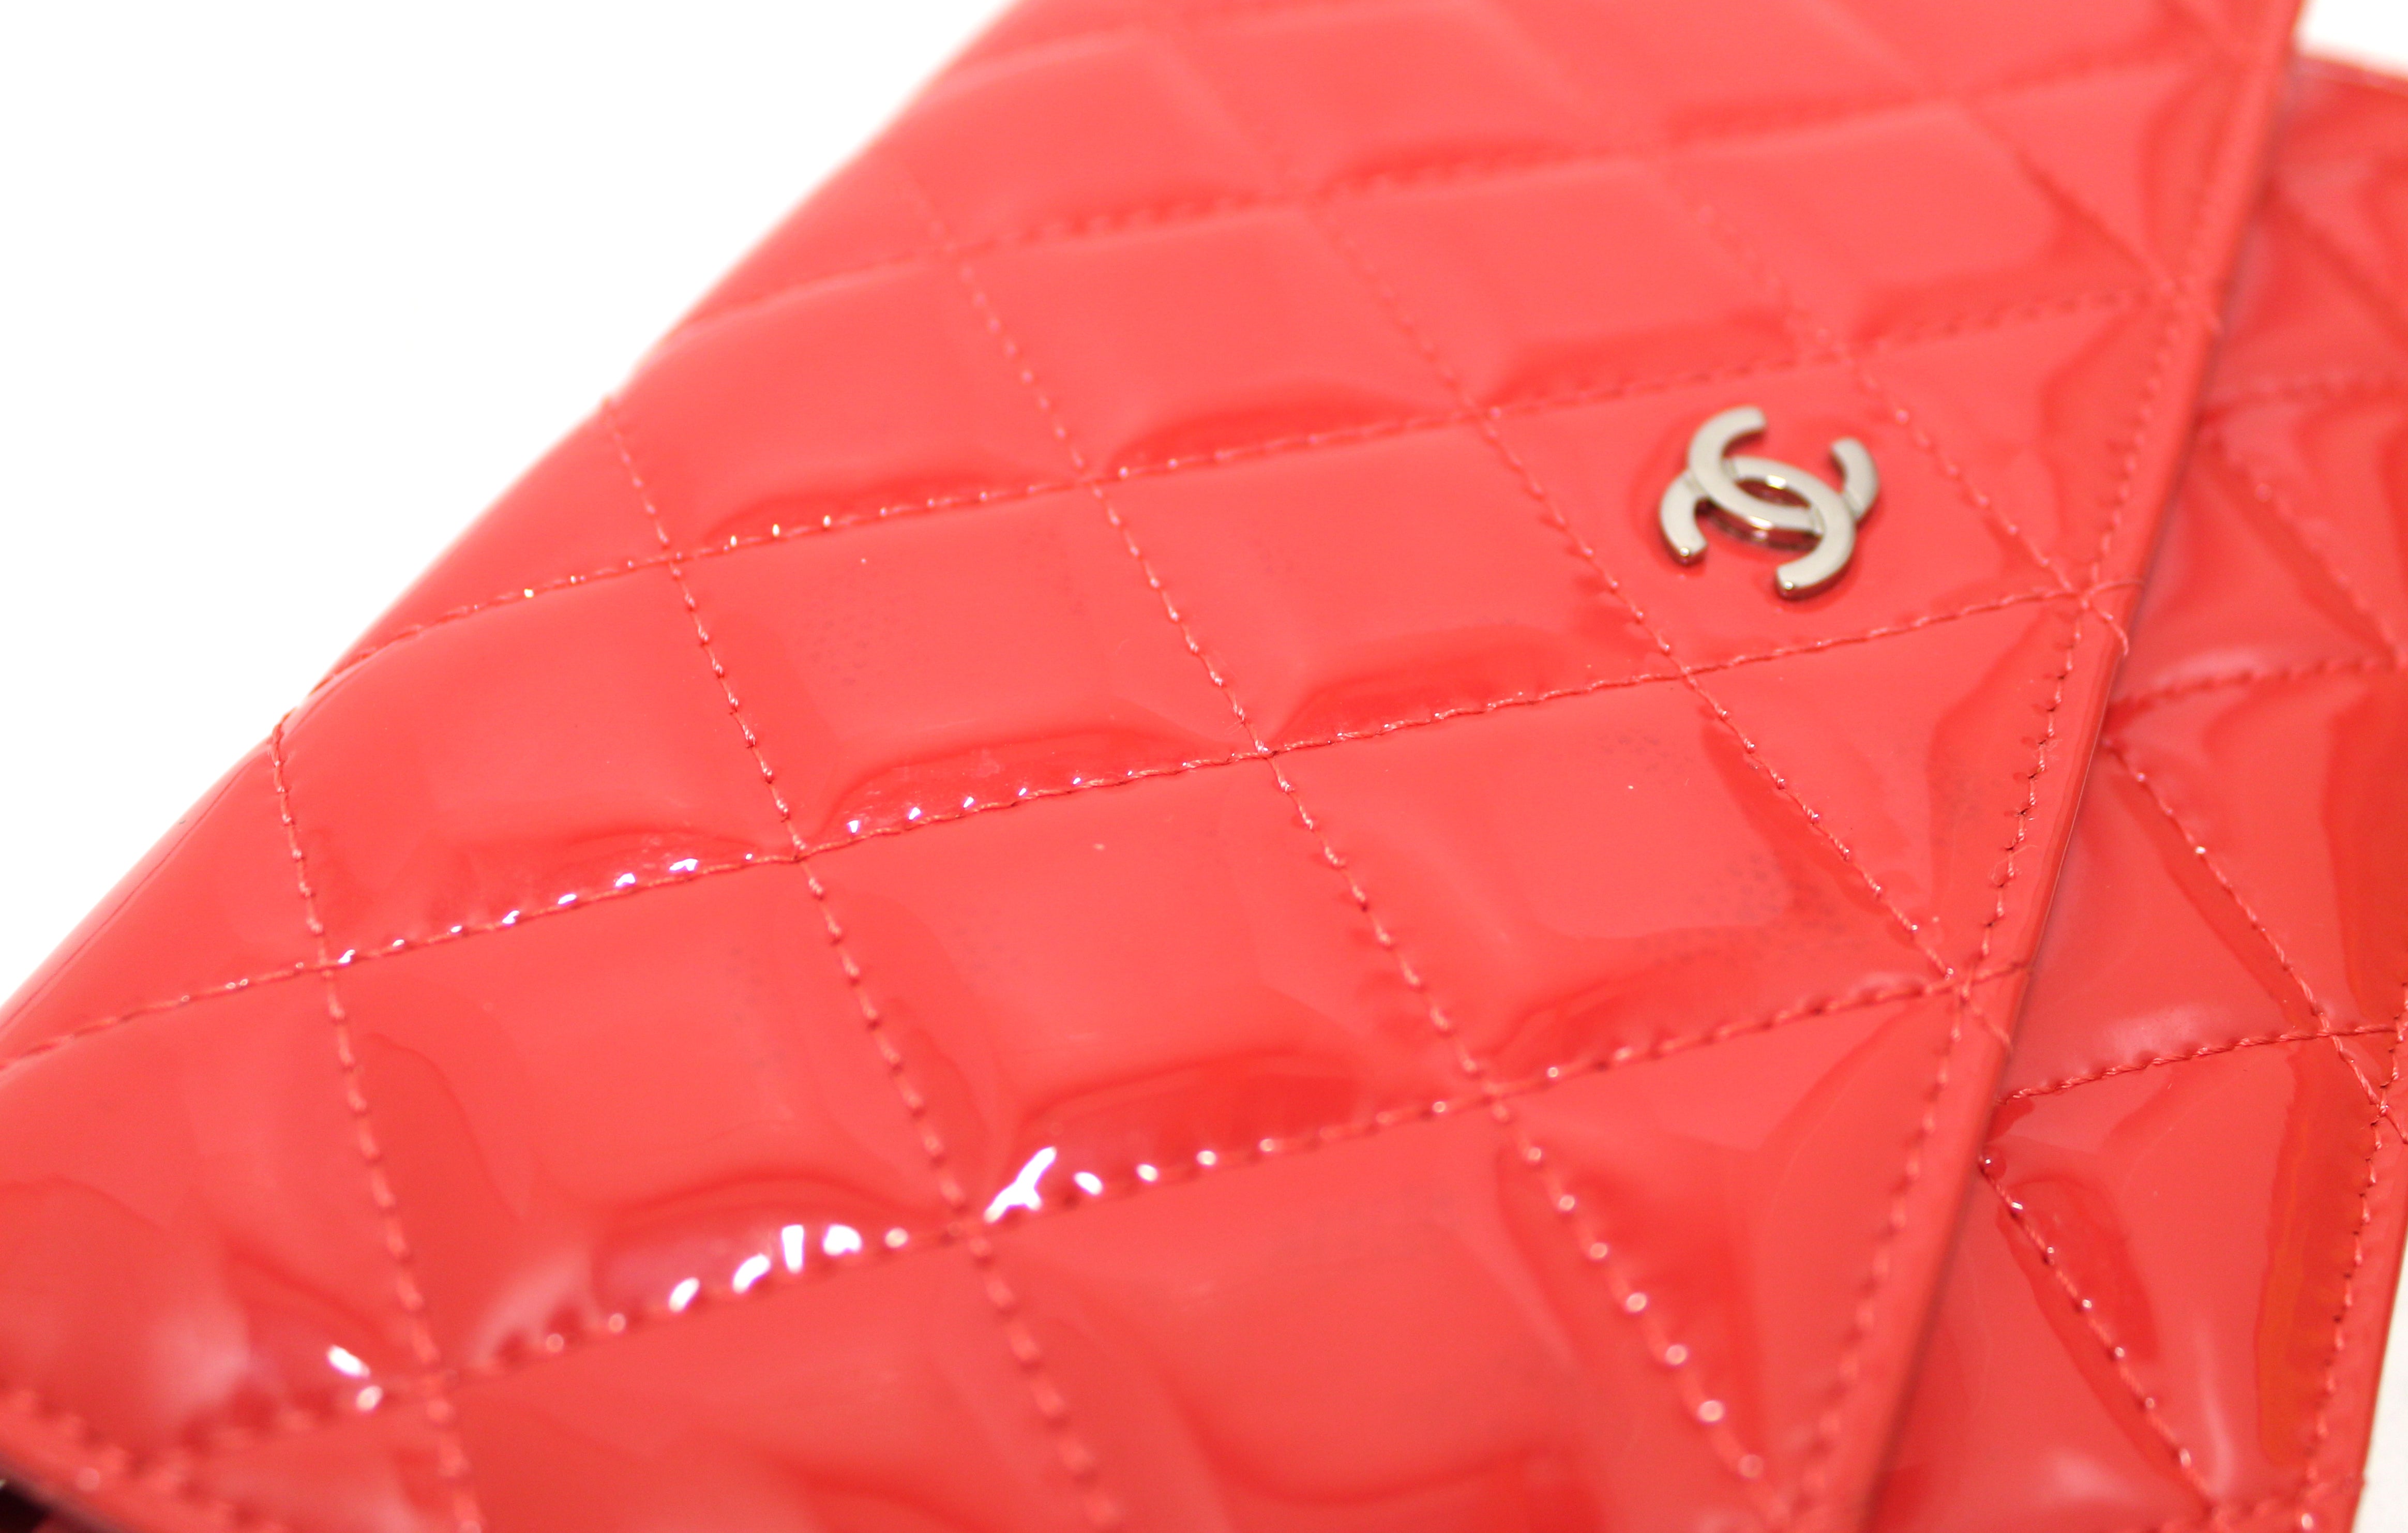 Authentic Chanel Red Quilted Patent Leather Wallet On Chain WOC Messenger Bag